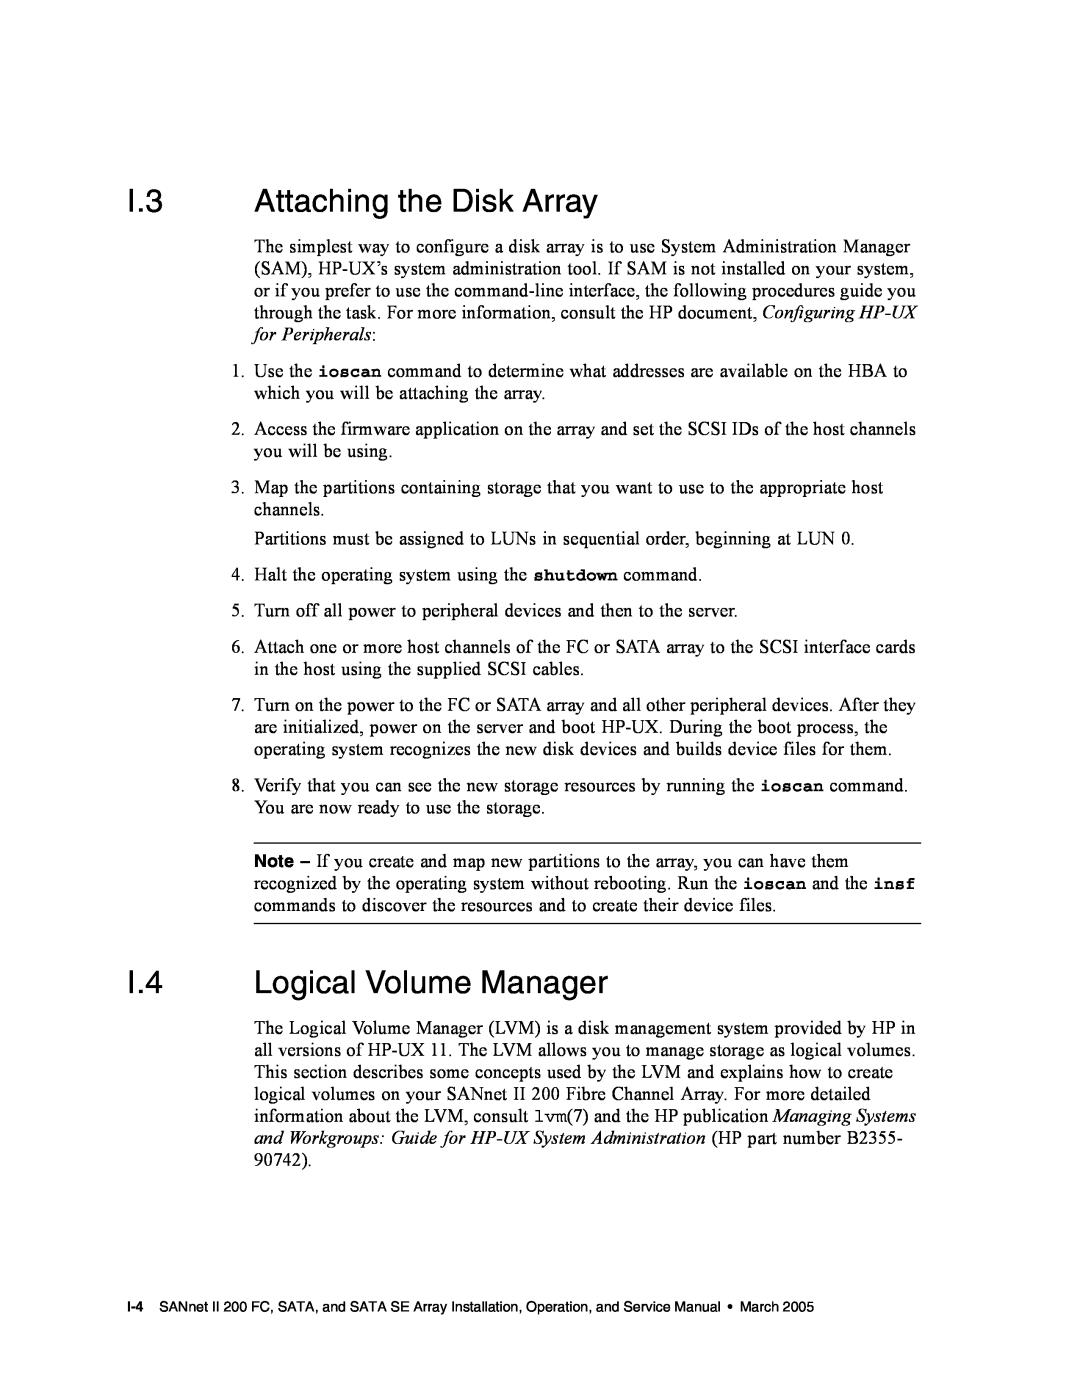 Dot Hill Systems II 200 FC service manual I.3 Attaching the Disk Array, I.4 Logical Volume Manager 